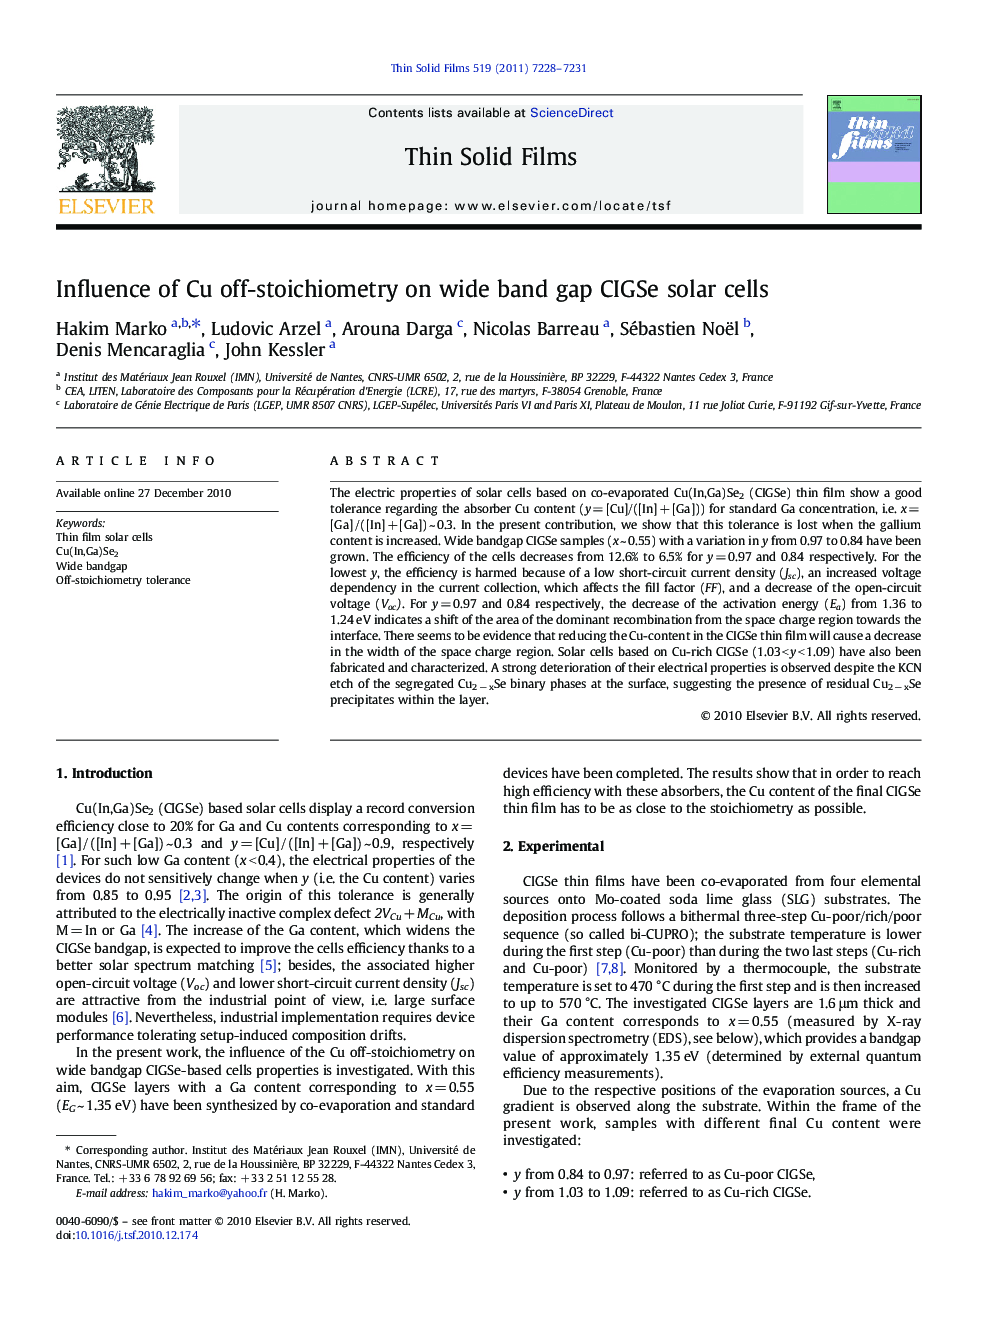 Influence of Cu off-stoichiometry on wide band gap CIGSe solar cells